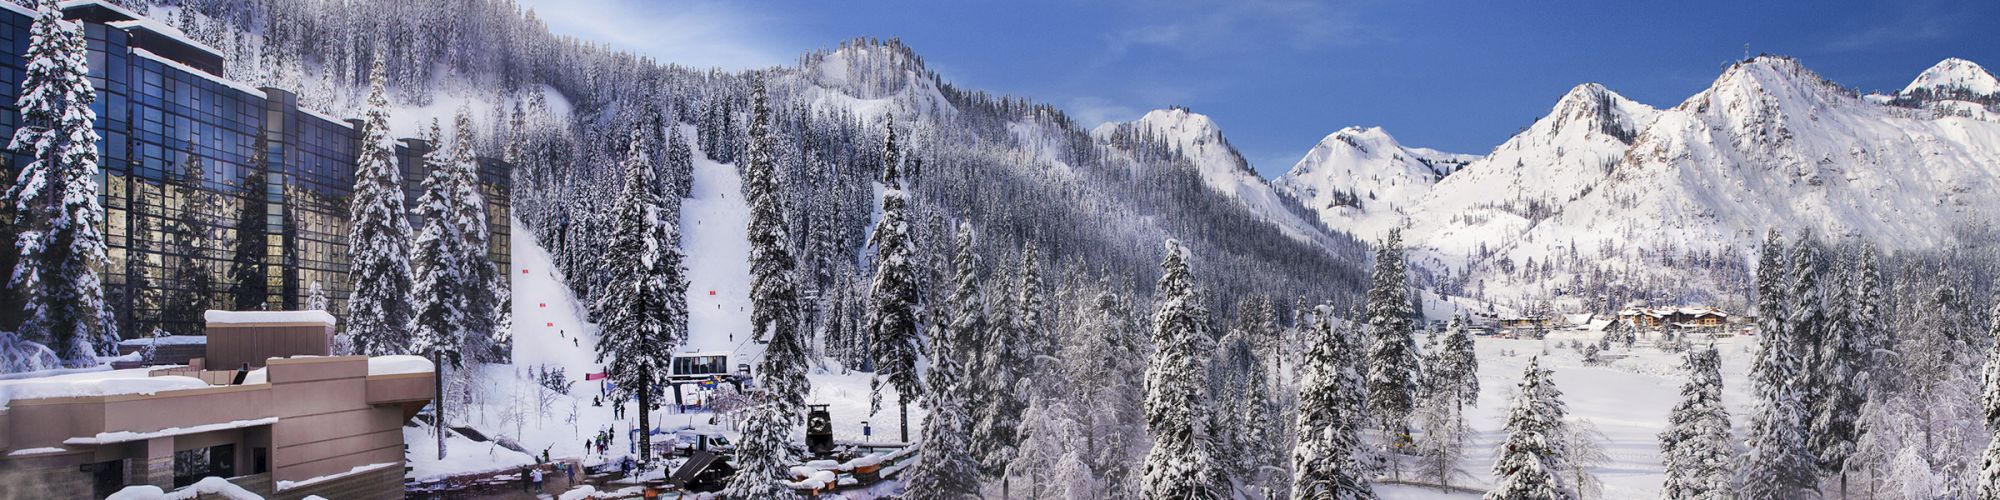 A snowy mountain resort with ski slopes, buildings, pine trees, and a partially frozen pond, set against a backdrop of snow-covered peaks.